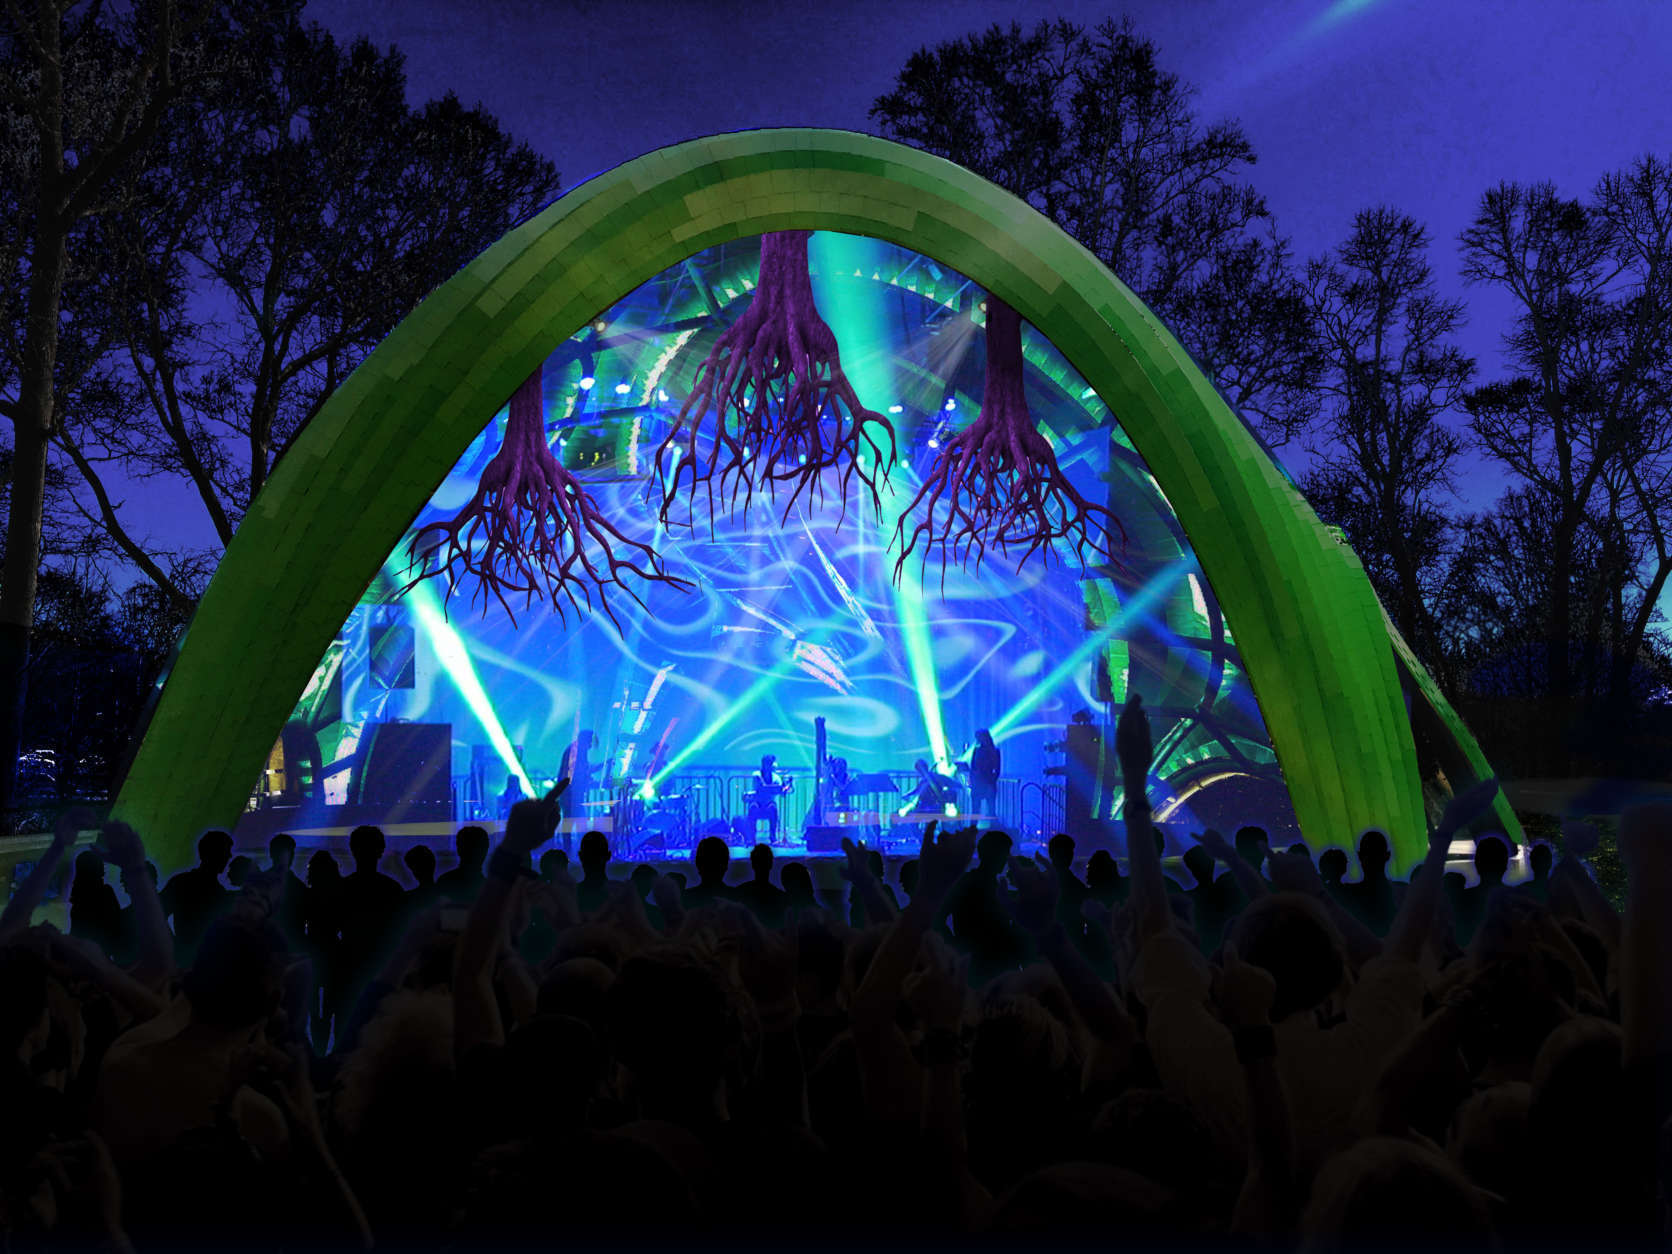 Merriweather Park's new Chrysalis stage shows there is potential for the park's cultural programming to diversify, said OPUS 1 curator and producer Ken Farmer. (Rendering courtesy Wild Dogs International)